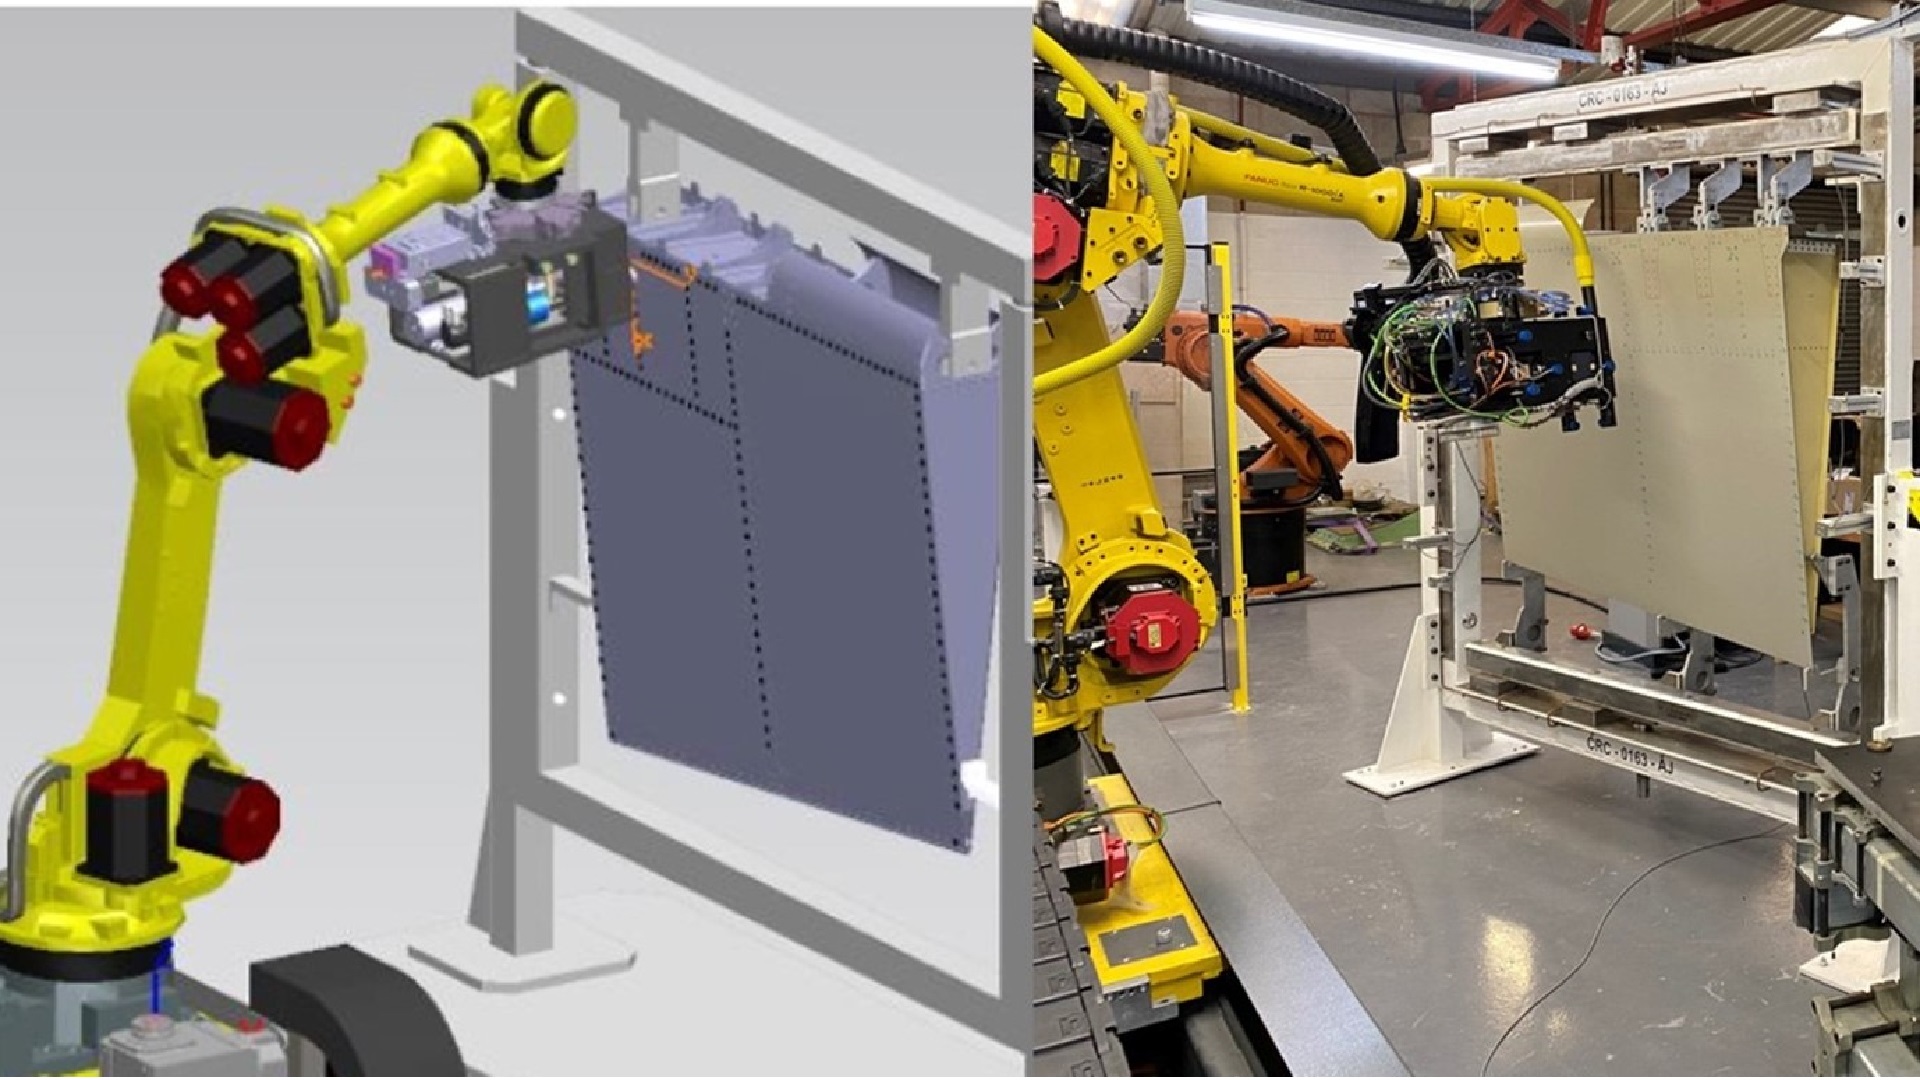 True Position Robotics (TPR) enters digital project collaboration with Spirit AeroSystems, on project DELTA (Digitally Enabled Low-Cost Technologies for Aerostructures)